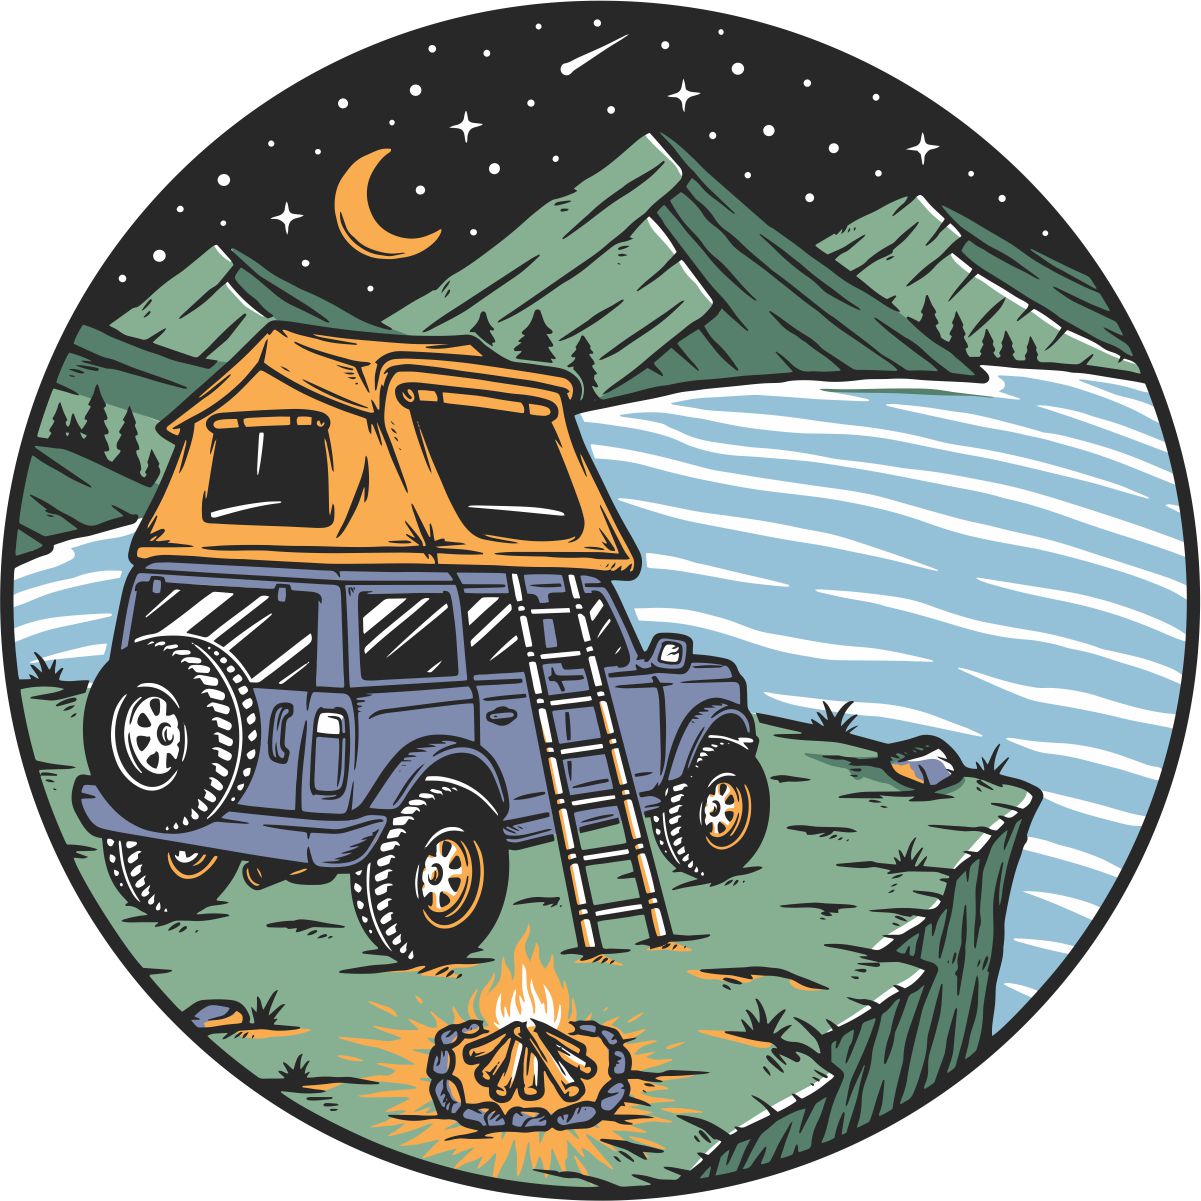 Camping spare tire cover. Campsite camping with your SUV and a rooftop tent on a mountain side overlooking the water under the night sky. Creative spare tire cover for camping enthusiasts.